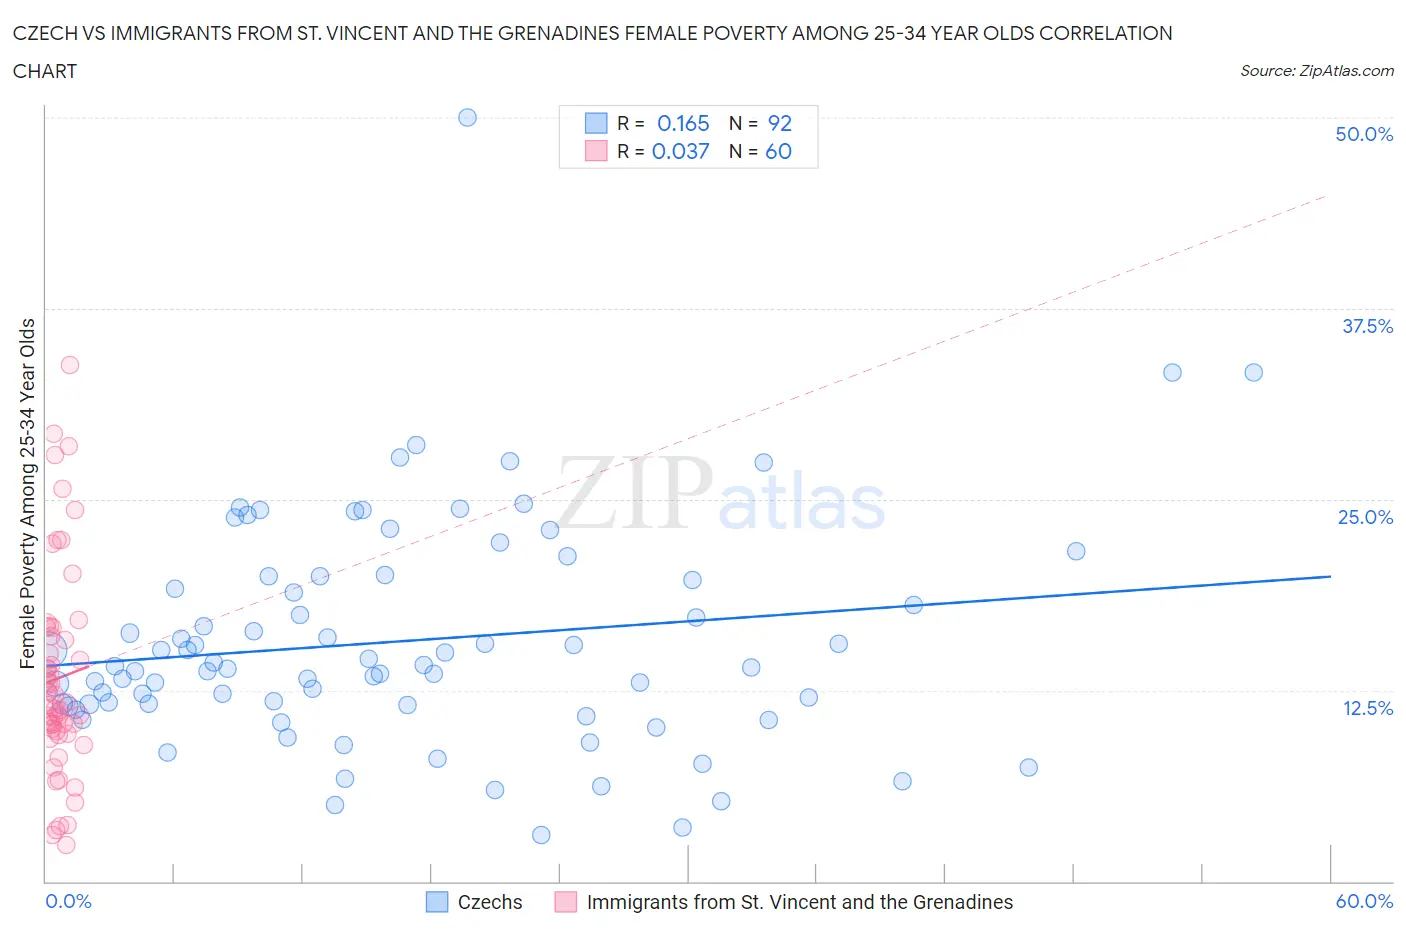 Czech vs Immigrants from St. Vincent and the Grenadines Female Poverty Among 25-34 Year Olds